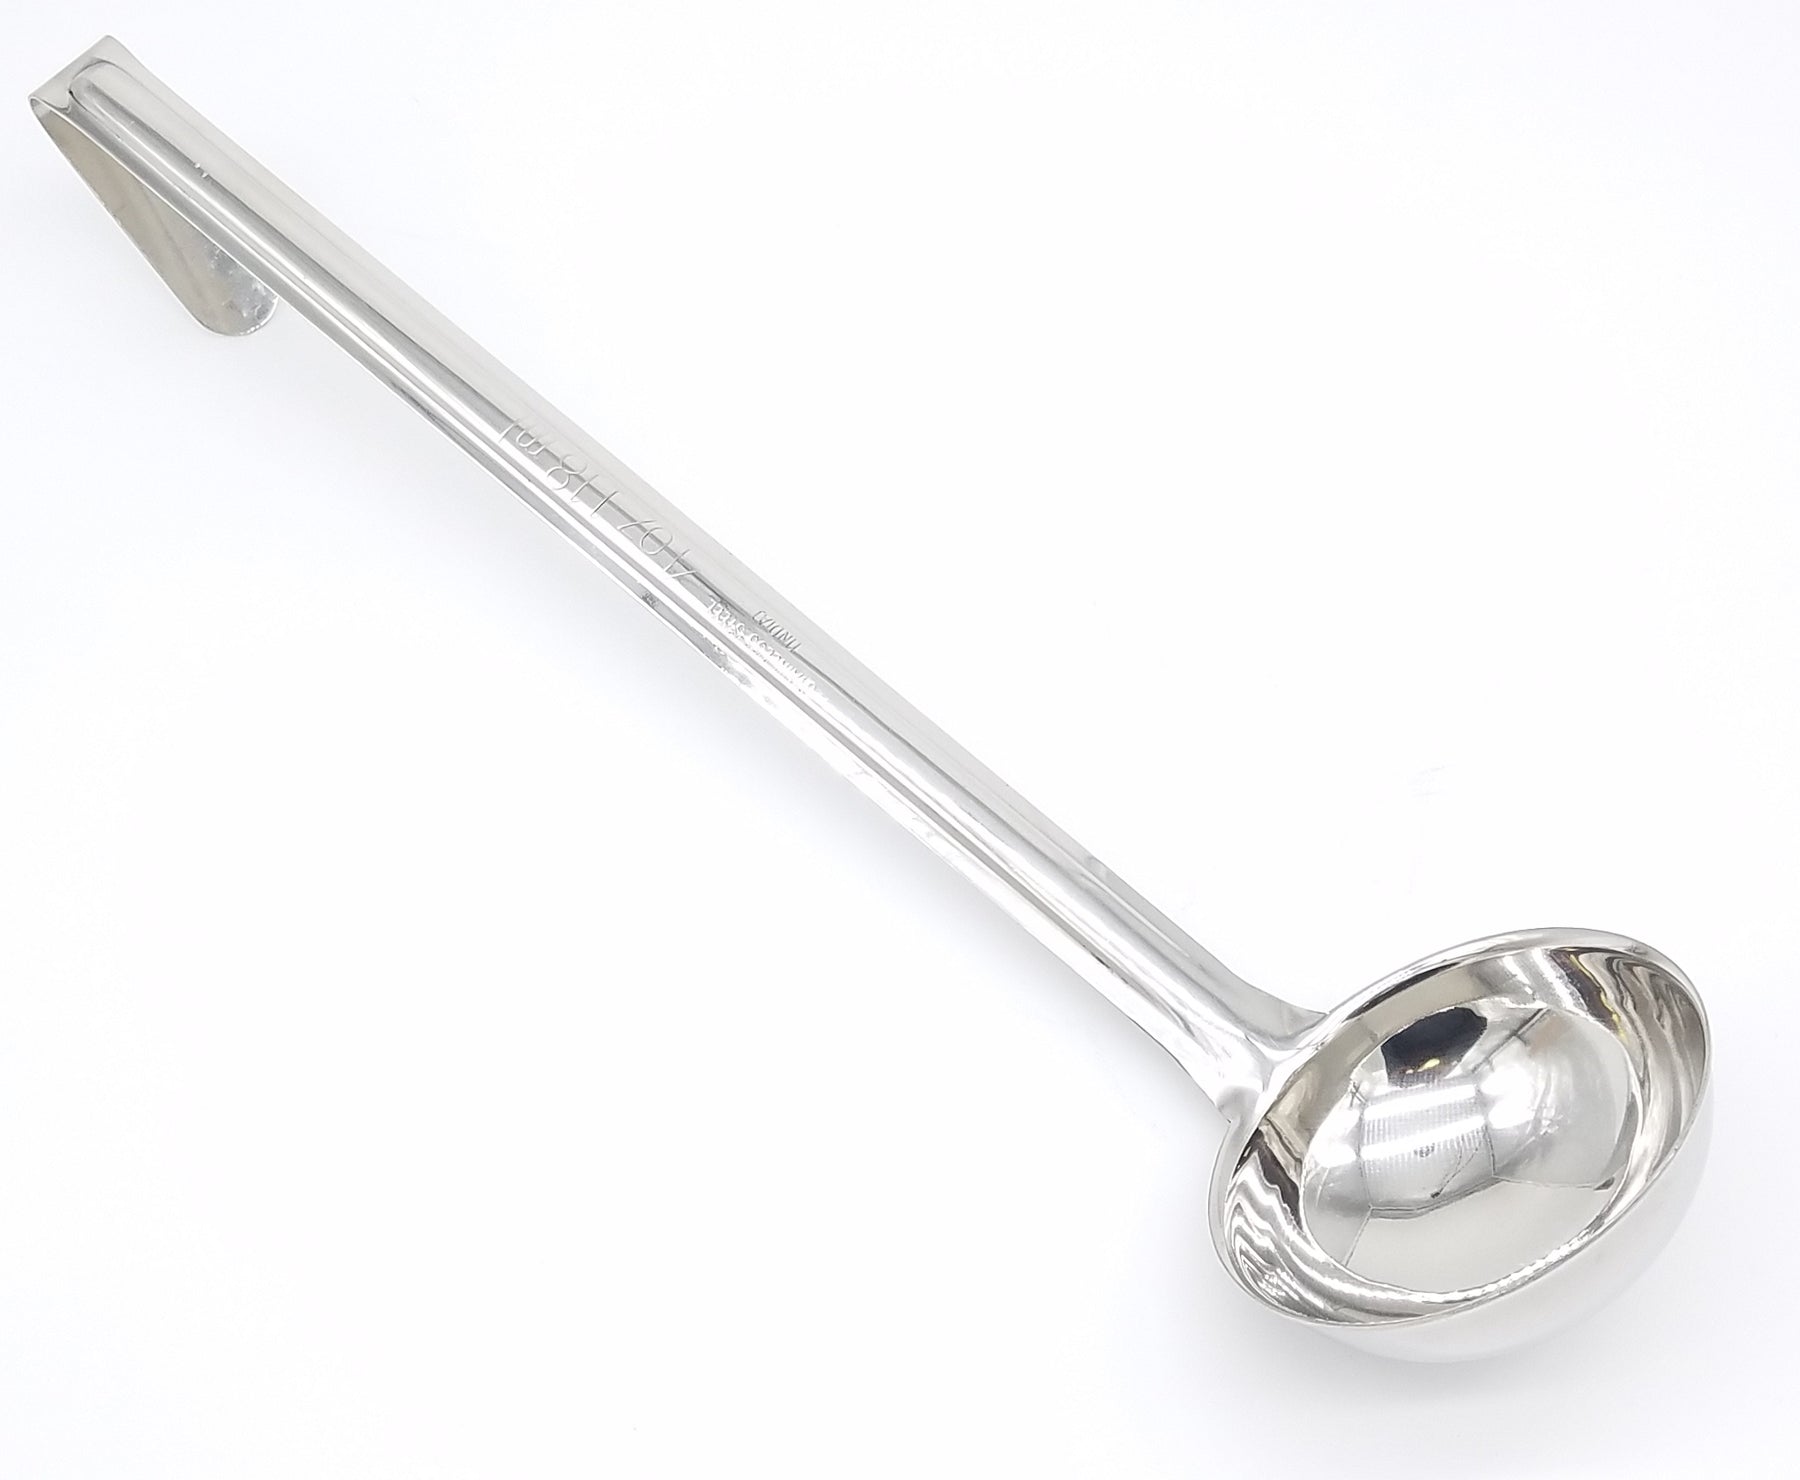 Choice 4 oz. One-Piece Stainless Steel Ladle